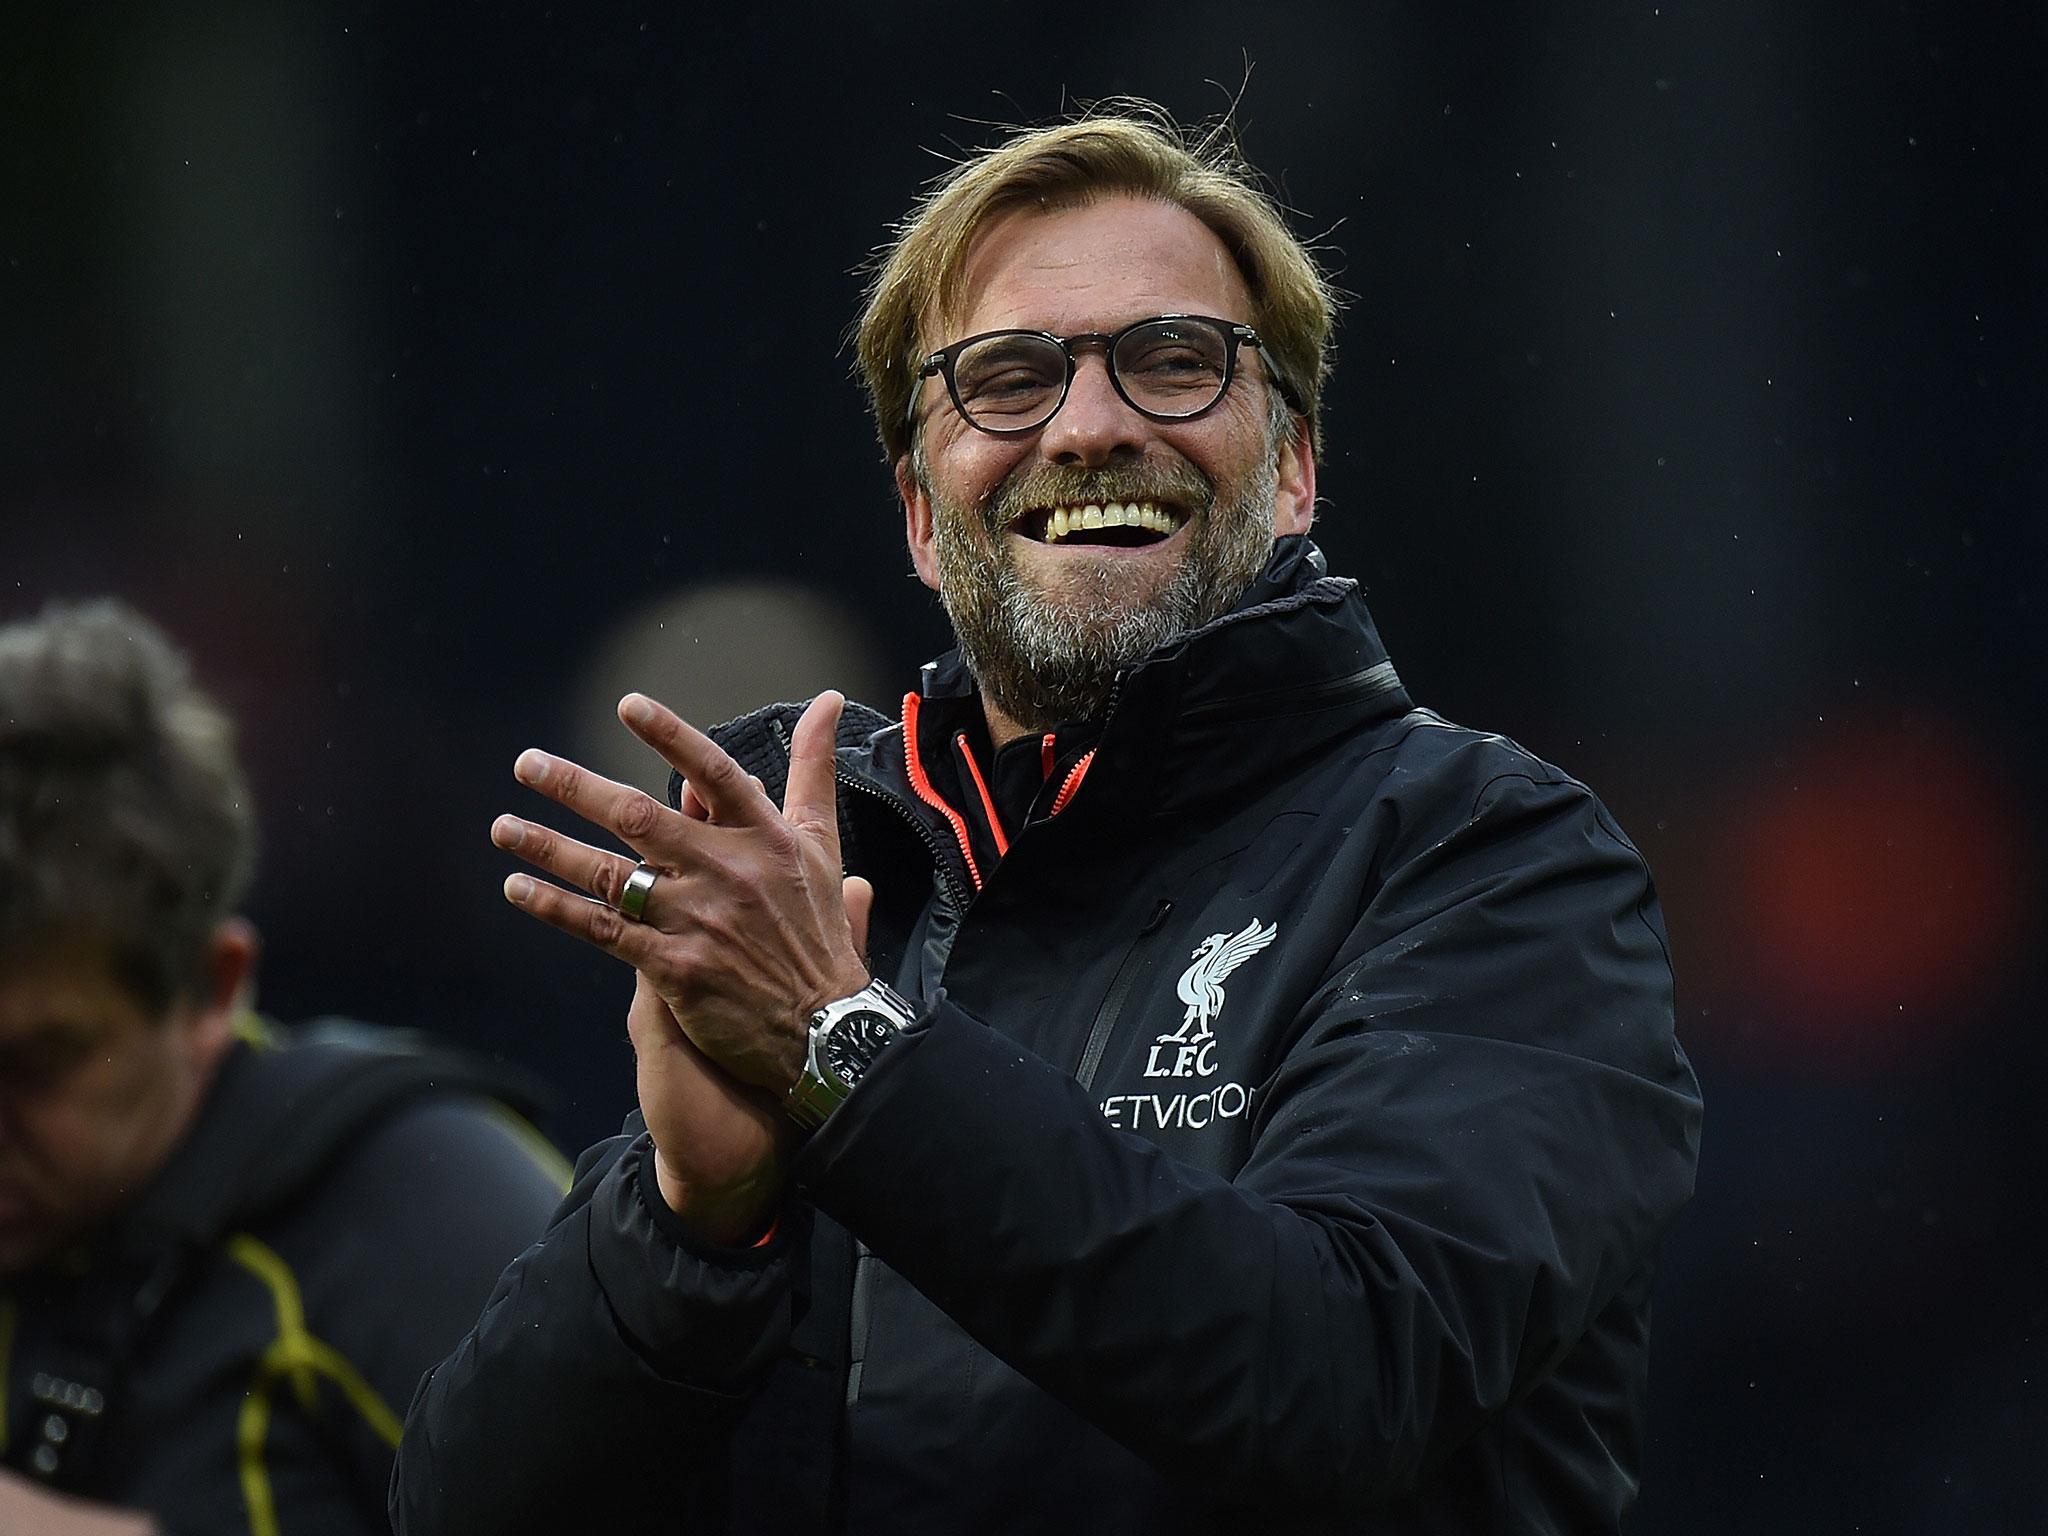 Jurgen Klopp was delighted to earn all three points at The Hawthorns